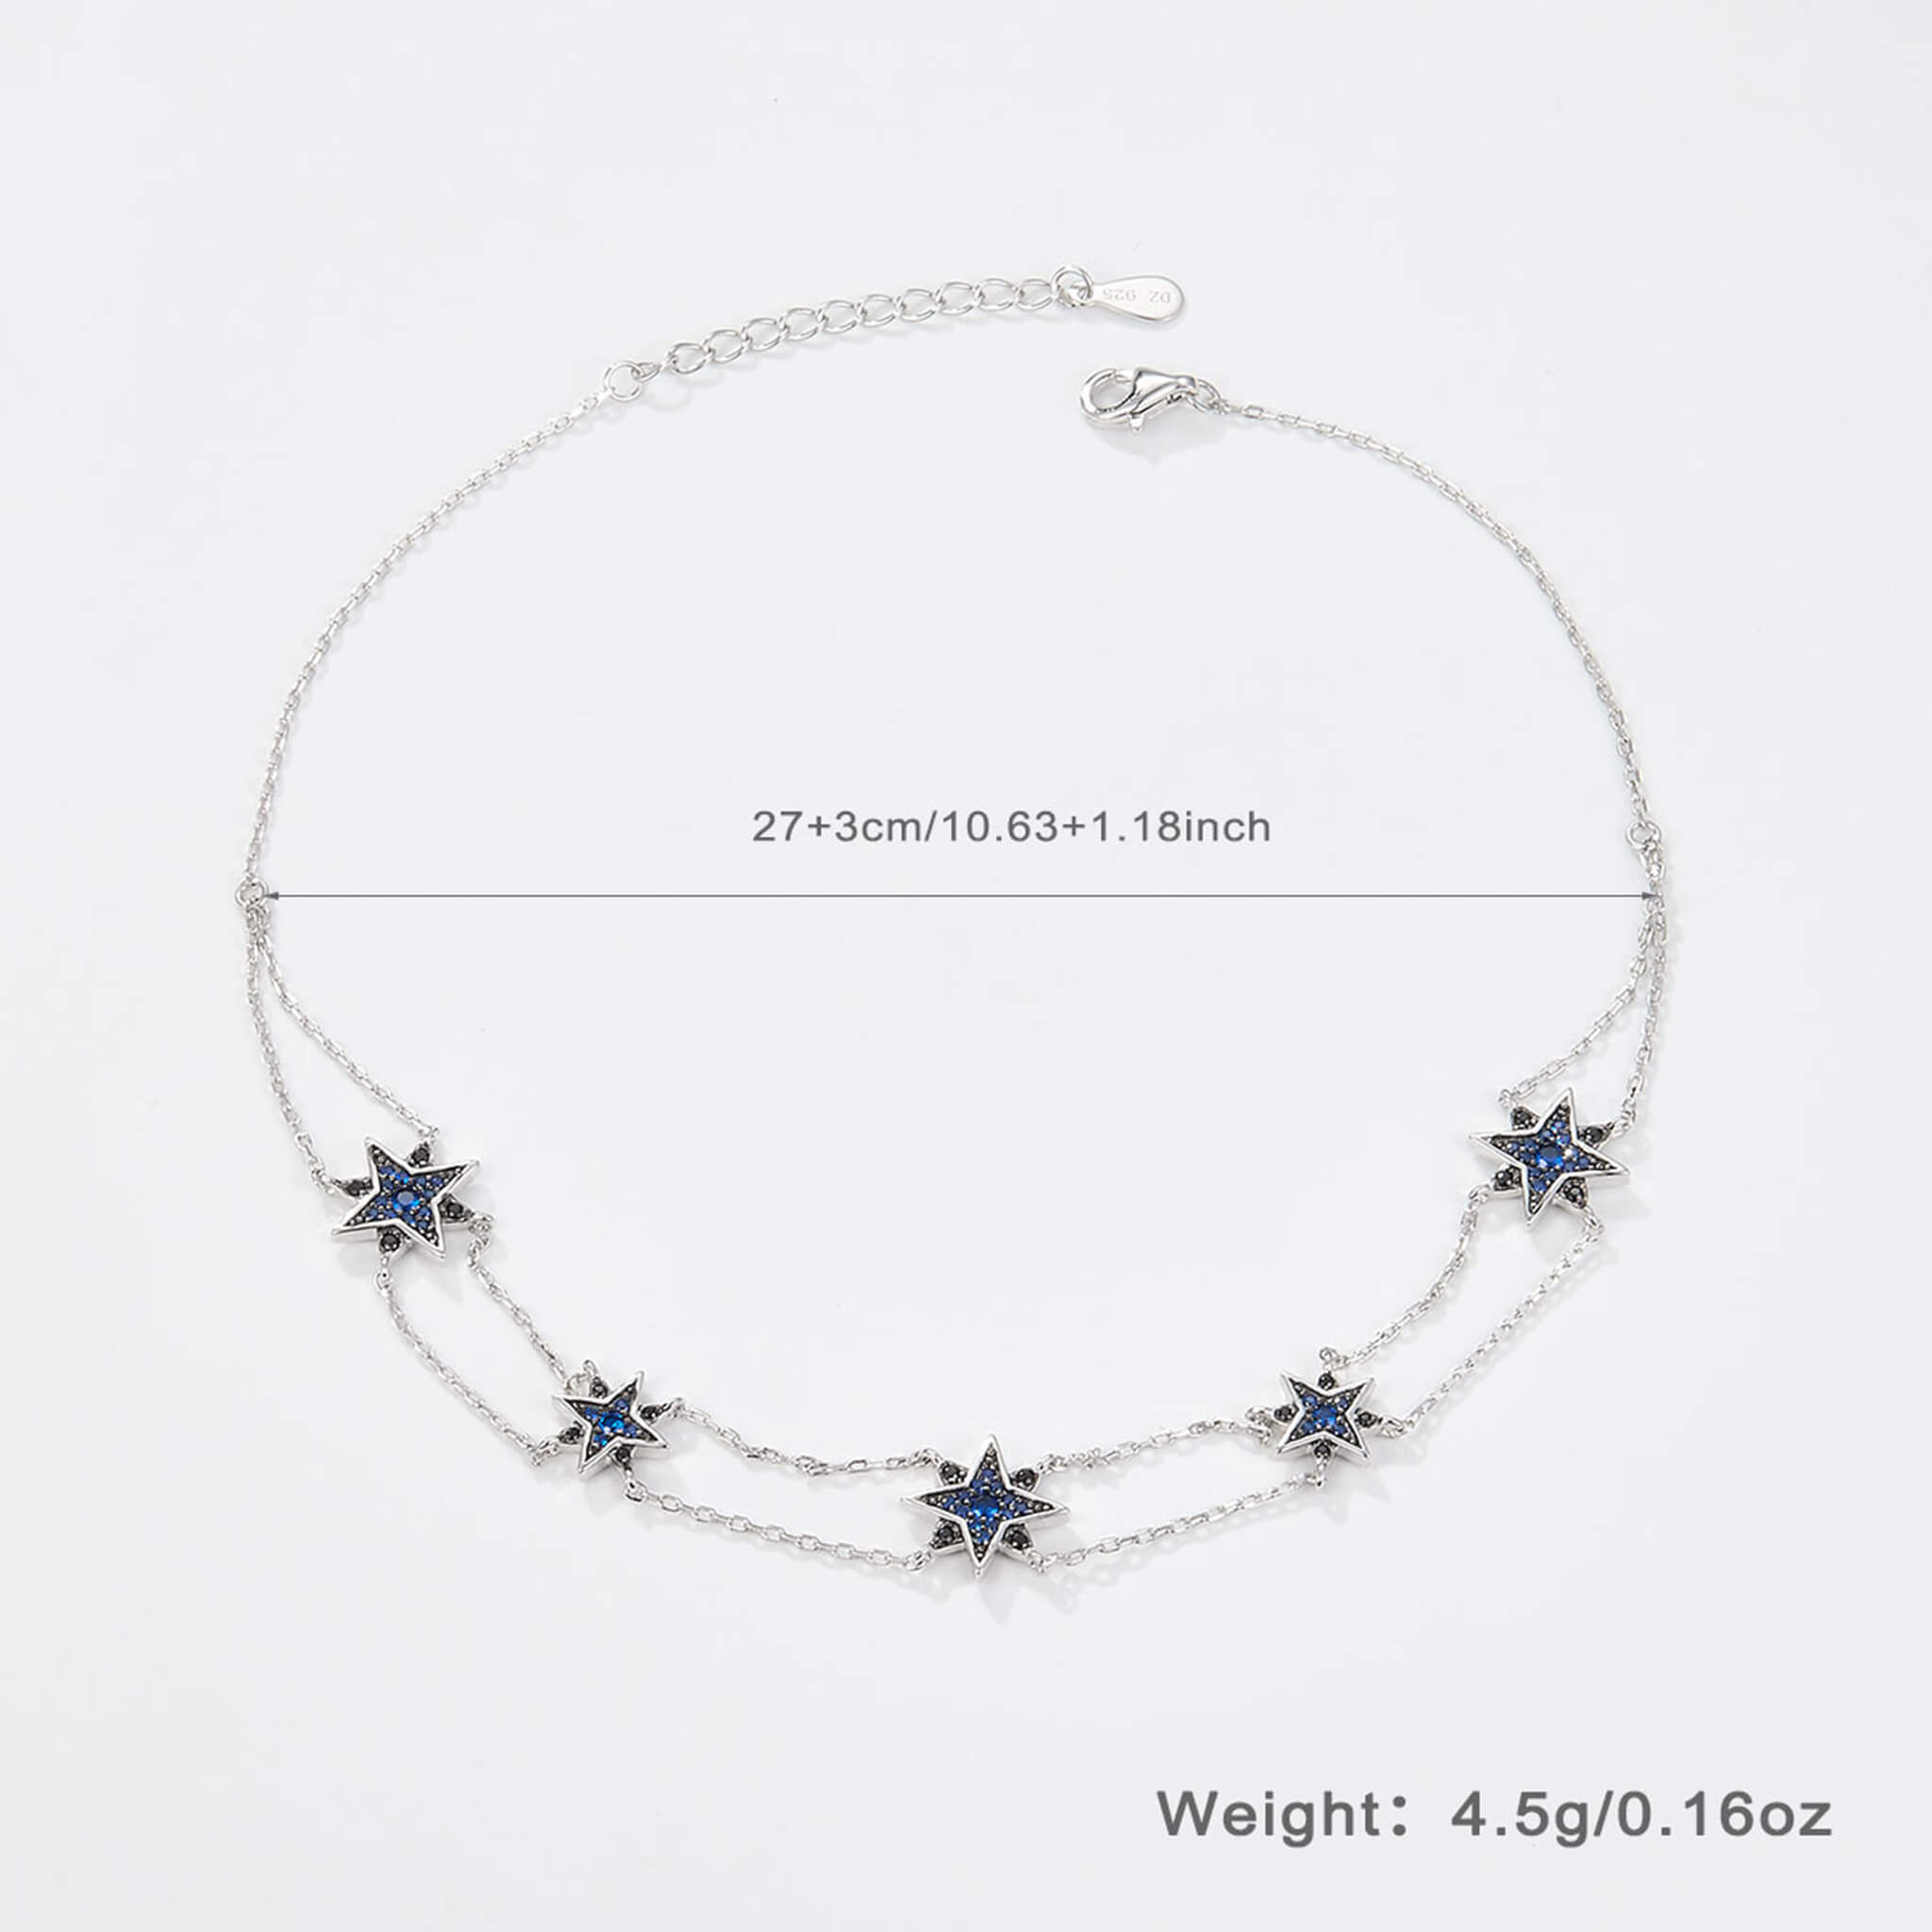 S925 Silver Snowflake Blue Crystal Earrings Necklace Set  UponBasics   